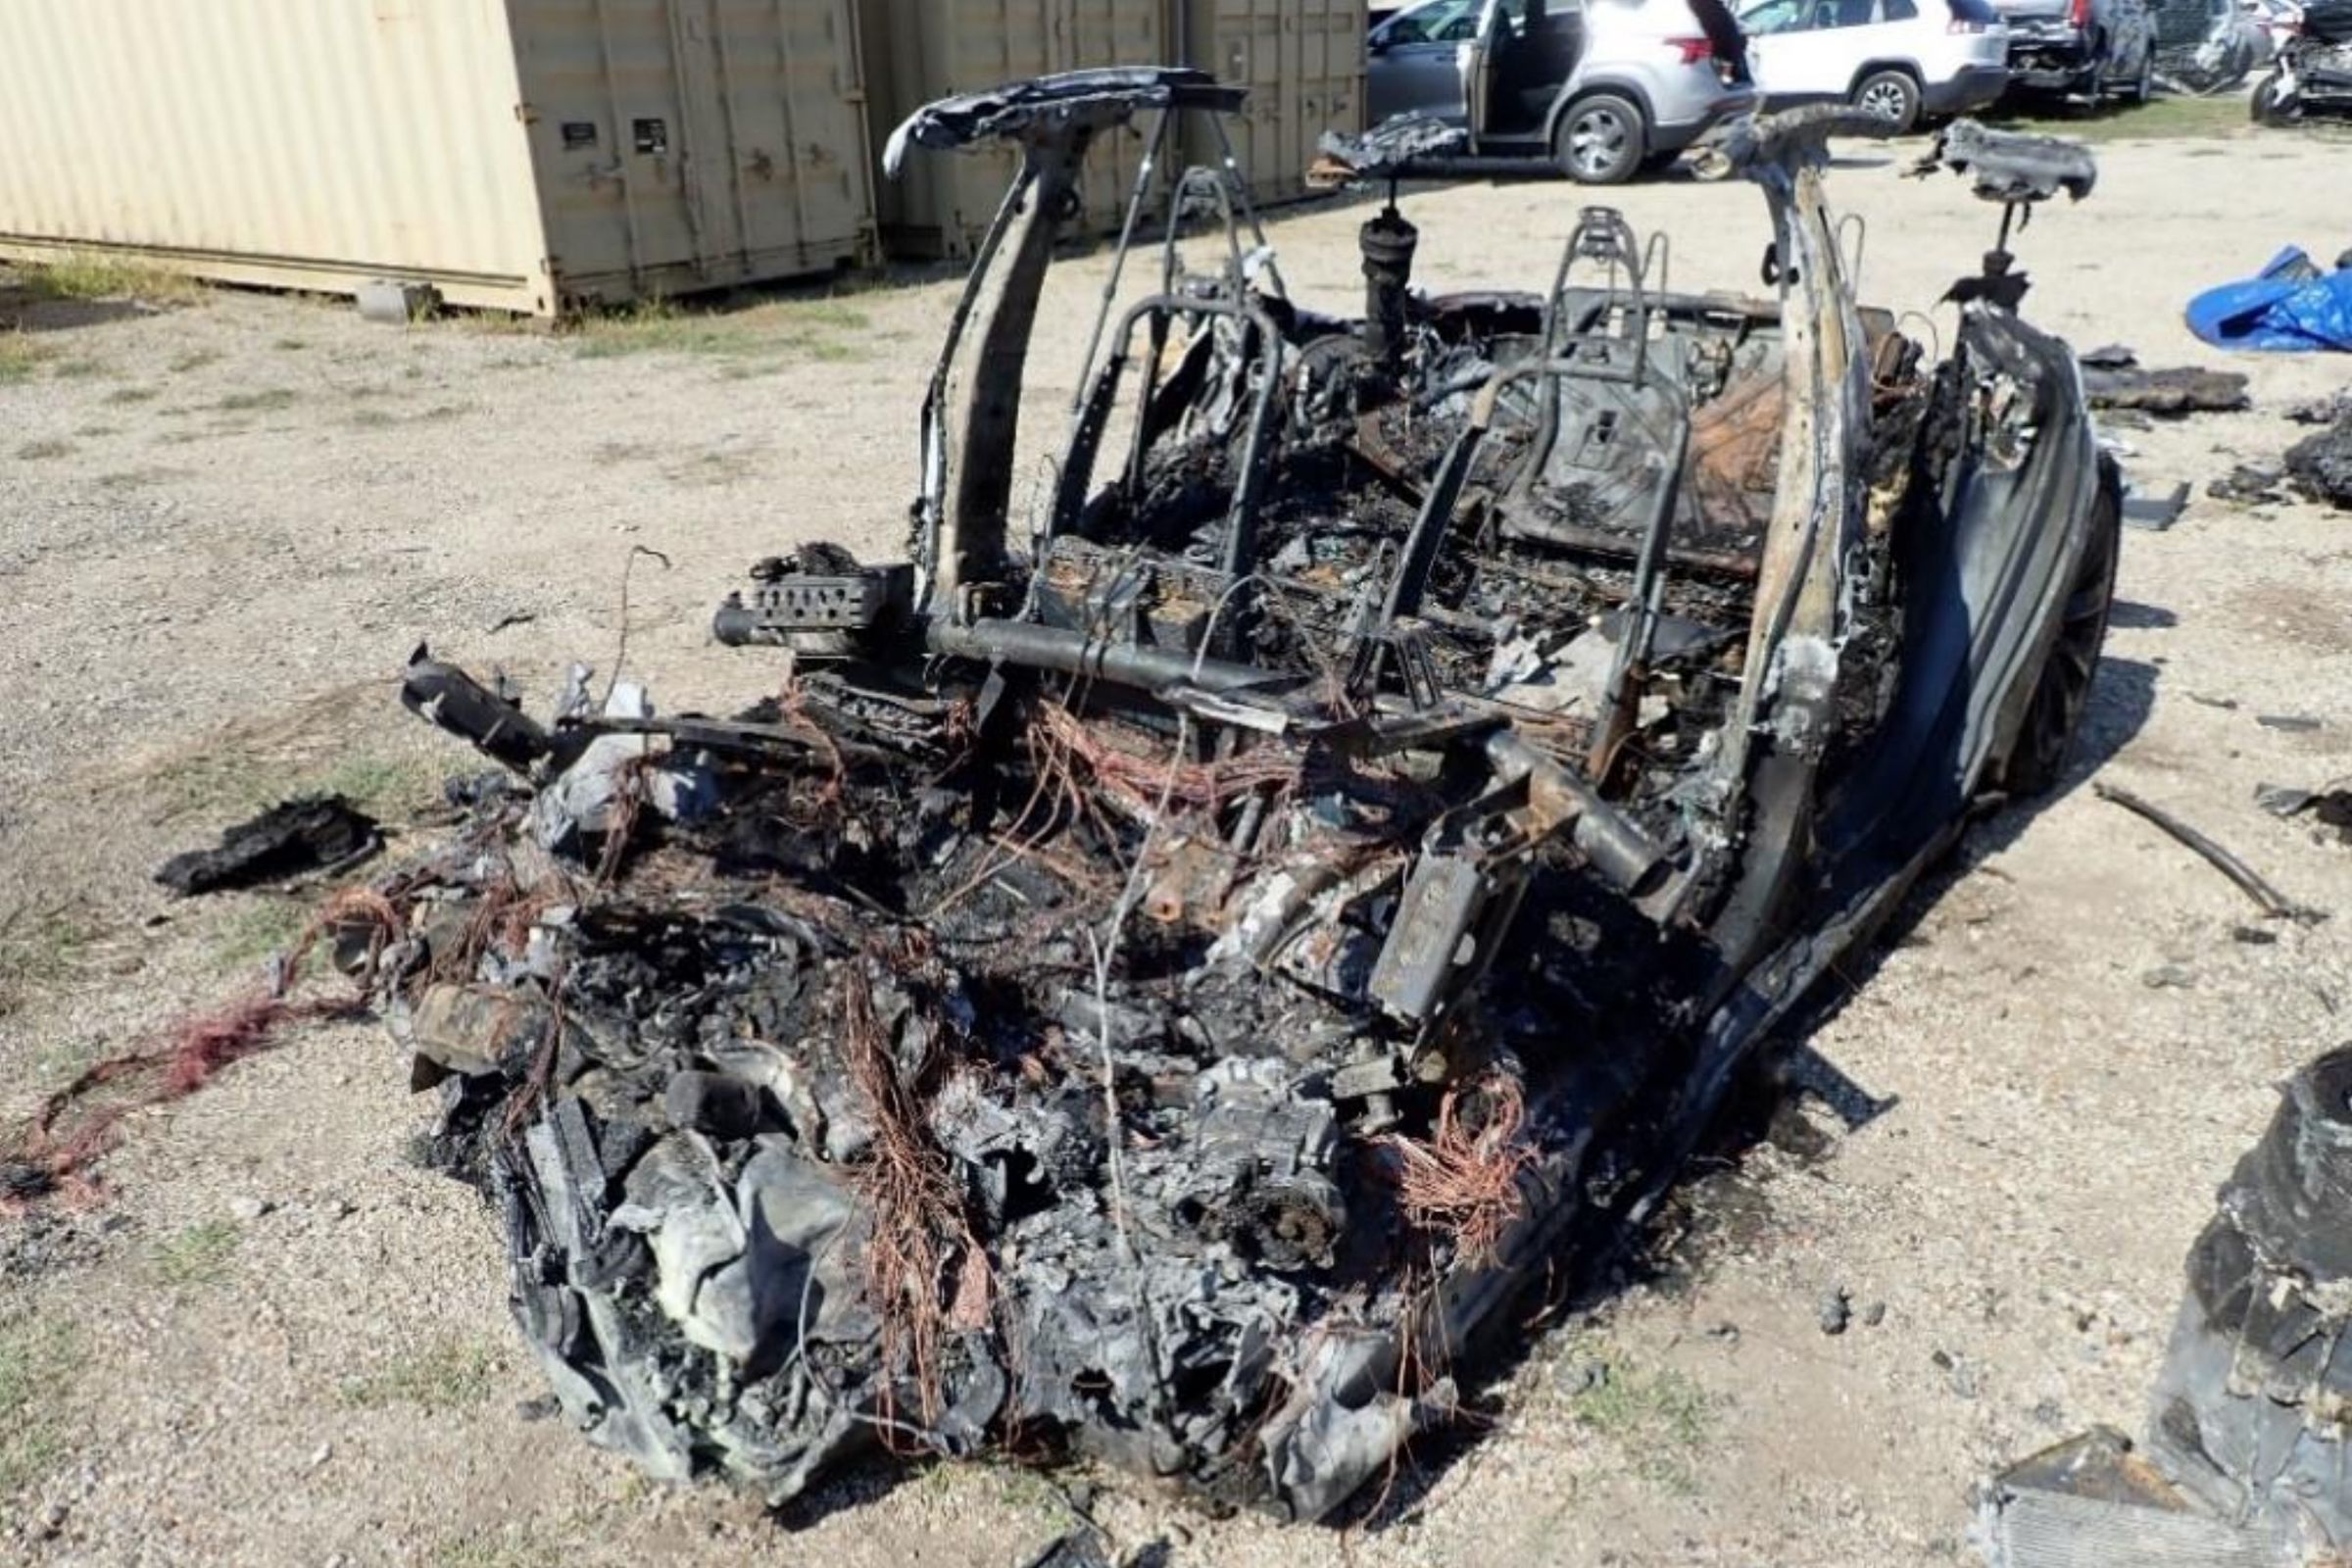 The aftermath of the Model S involved in the fiery Texas crash.